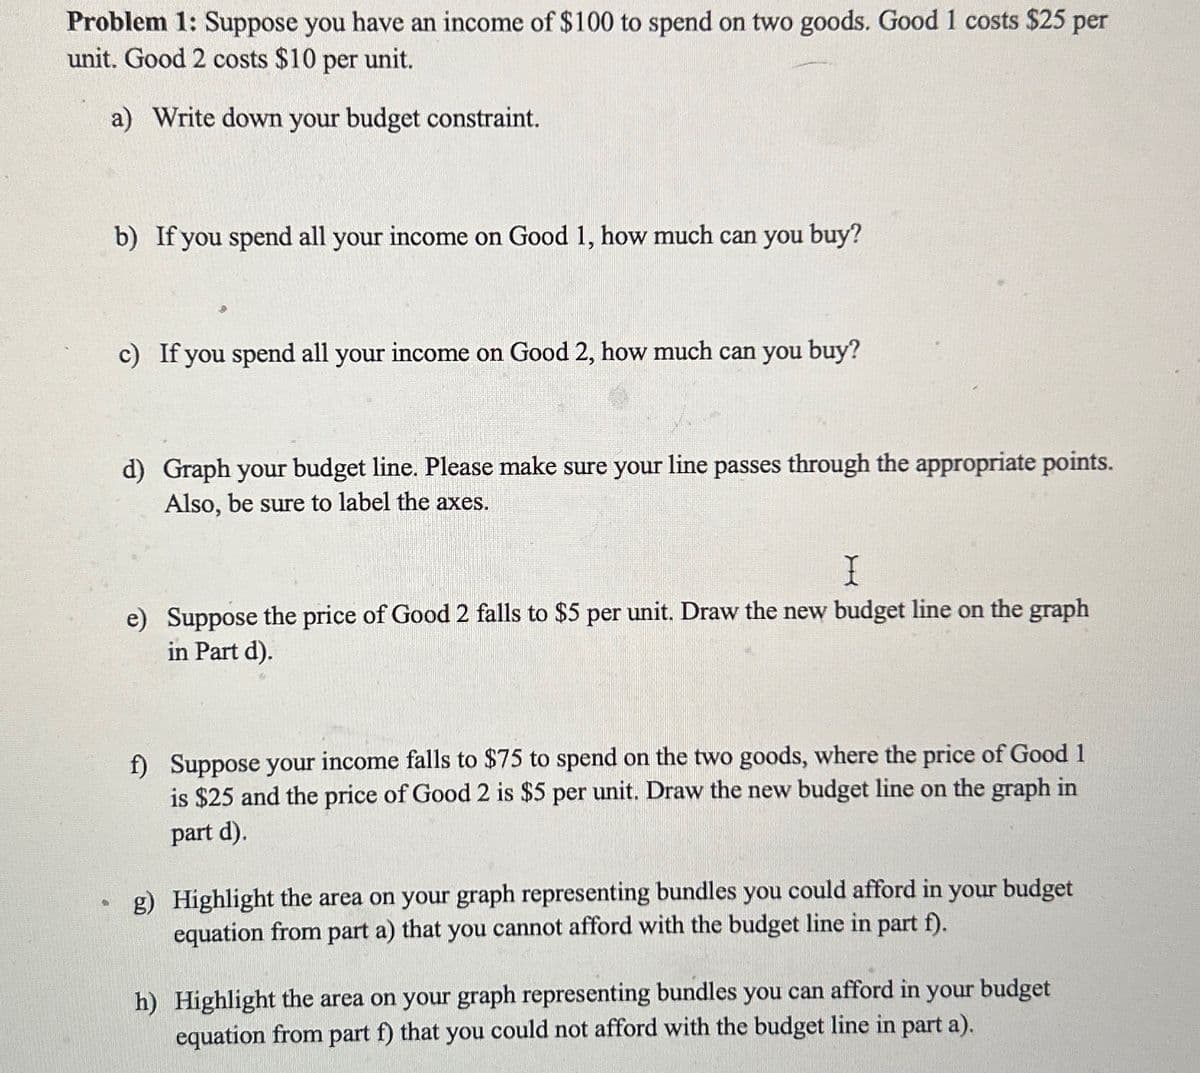 Problem 1: Suppose you have an income of $100 to spend on two goods. Good 1 costs $25 per
unit. Good 2 costs $10 per unit.
a) Write down your budget constraint.
b) If you spend all your income on Good 1, how much can you buy?
c) If you spend all your income on Good 2, how much can you buy?
d) Graph your budget line. Please make sure your line passes through the appropriate points.
Also, be sure to label the axes.
I
e) Suppose the price of Good 2 falls to $5 per unit. Draw the new budget line on the graph
in Part d).
f) Suppose your income falls to $75 to spend on the two goods, where the price of Good 1
is $25 and the price of Good 2 is $5 per unit. Draw the new budget line on the graph in
part d).
g) Highlight the area on your graph representing bundles you could afford in your budget
equation from part a) that you cannot afford with the budget line in part f).
h) Highlight the area on your graph representing bundles you can afford in your budget
equation from part f) that you could not afford with the budget line in part a).